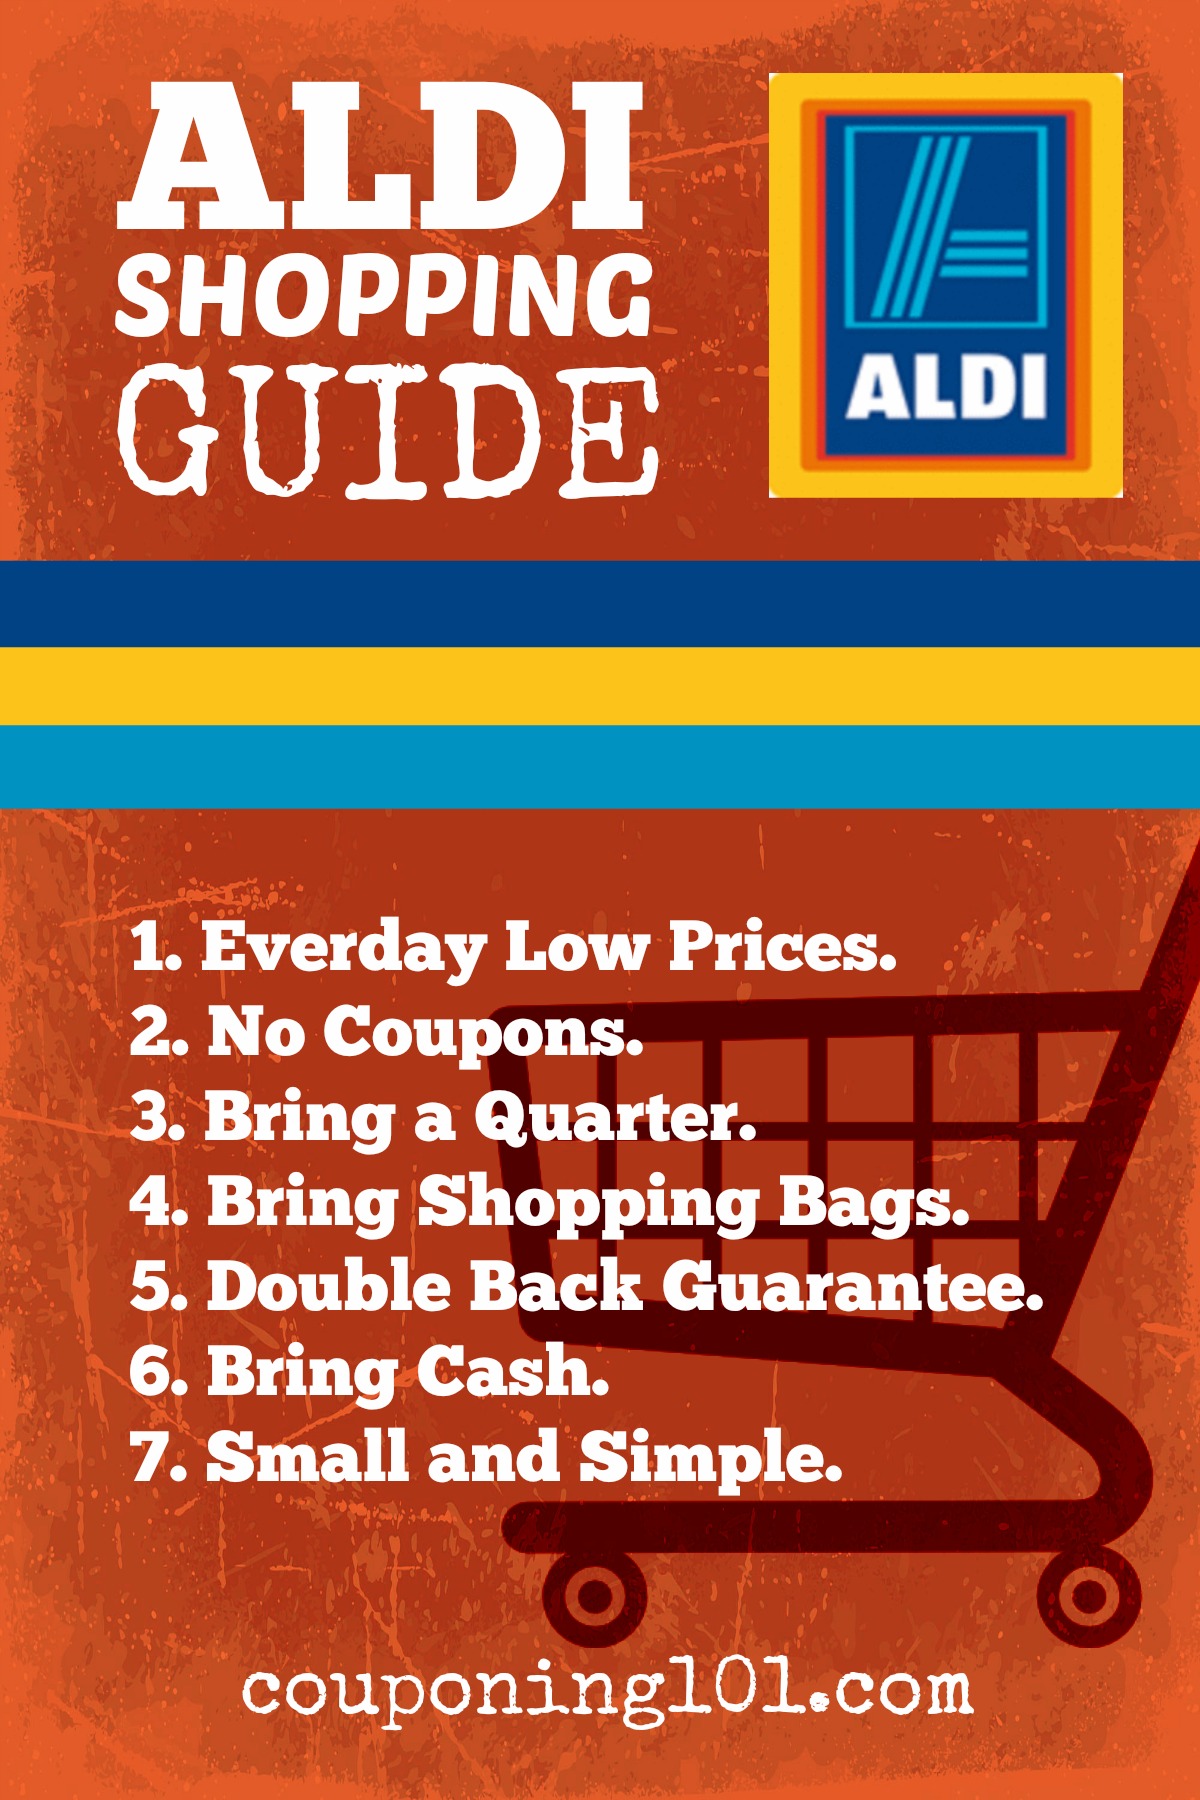 A simple guide to shopping and saving at Aldi discount supermarkets!